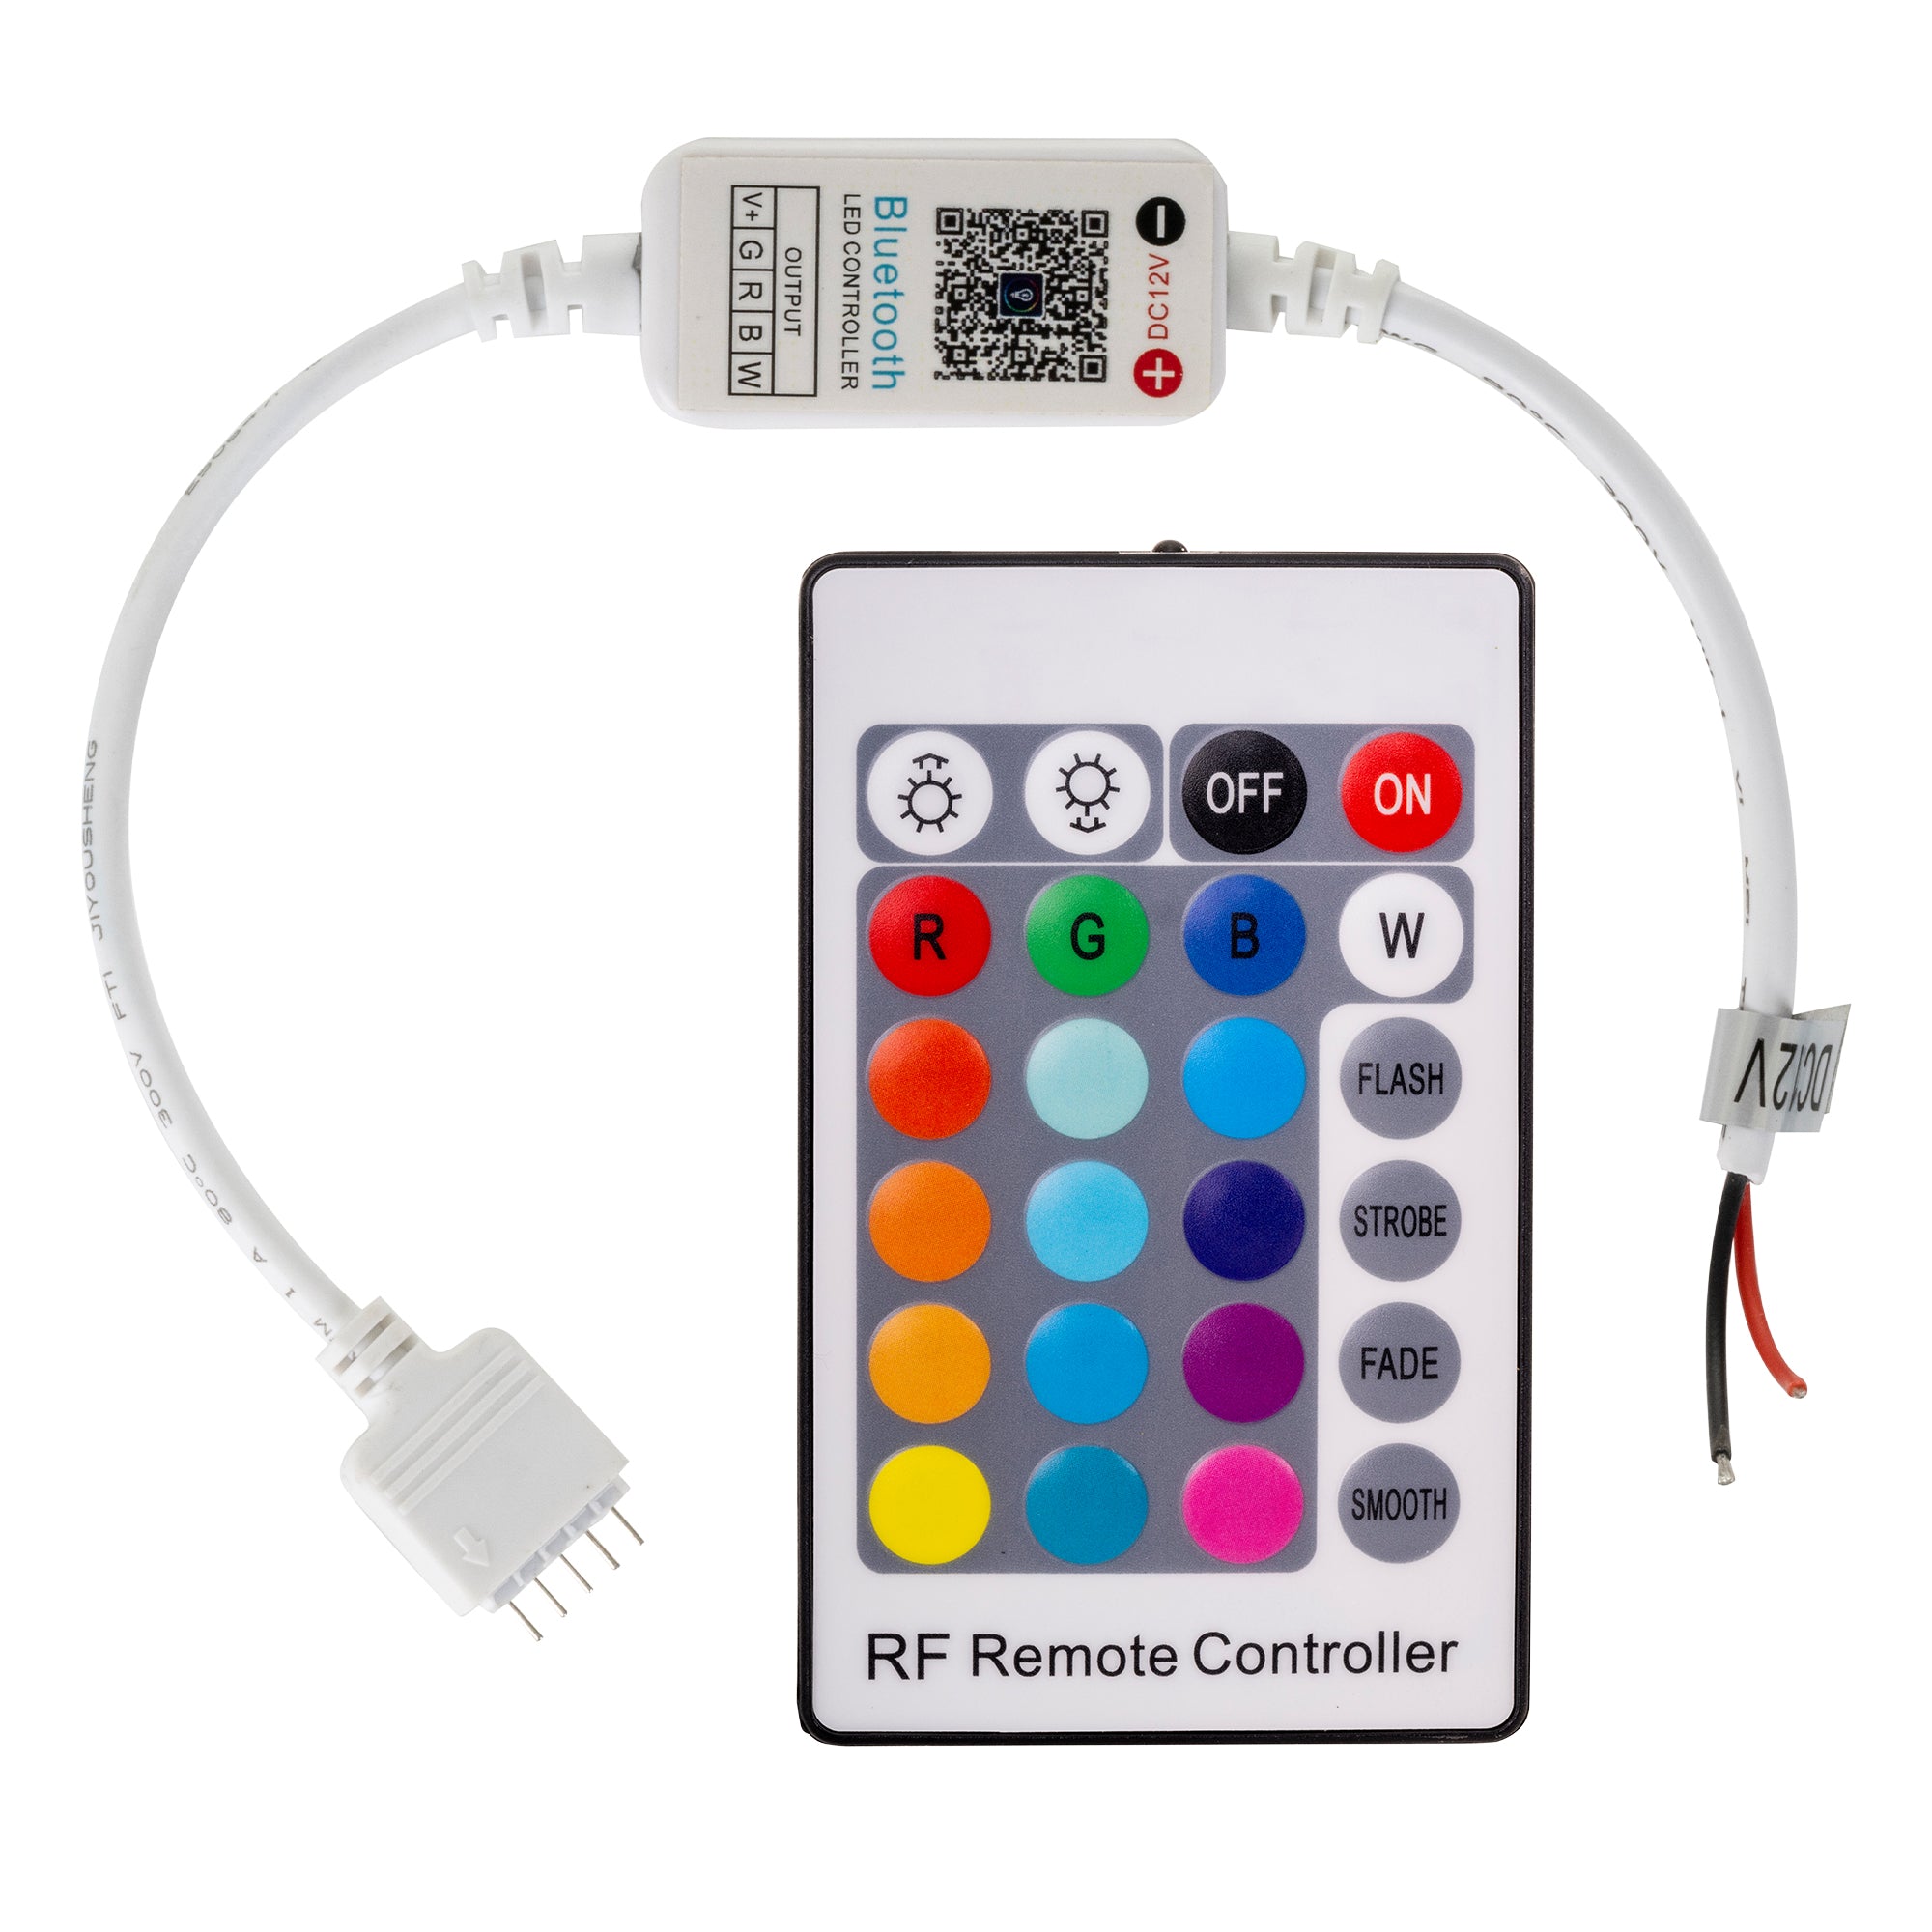 HV9601 - RGBW controller to suit Halo RGBW Wall Lights